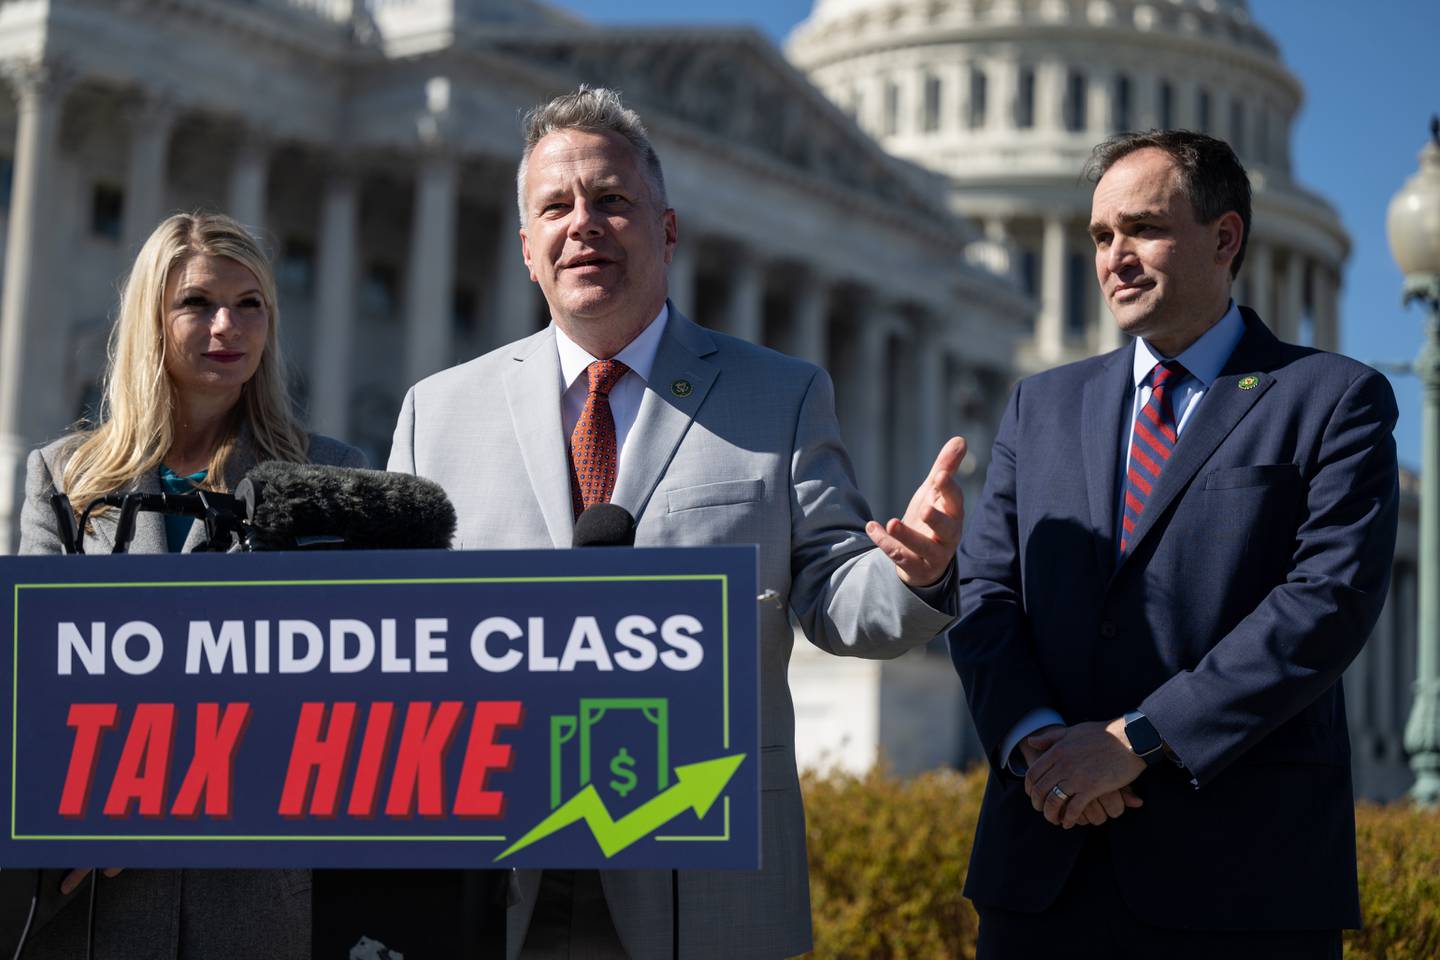 U.S. Rep. Eric Sorensen, center, appears with fellow House Democrats Brittany Pettersen of Colorado and Wiley Nickel of North Carolina in stating their opposition to a national sales tax.